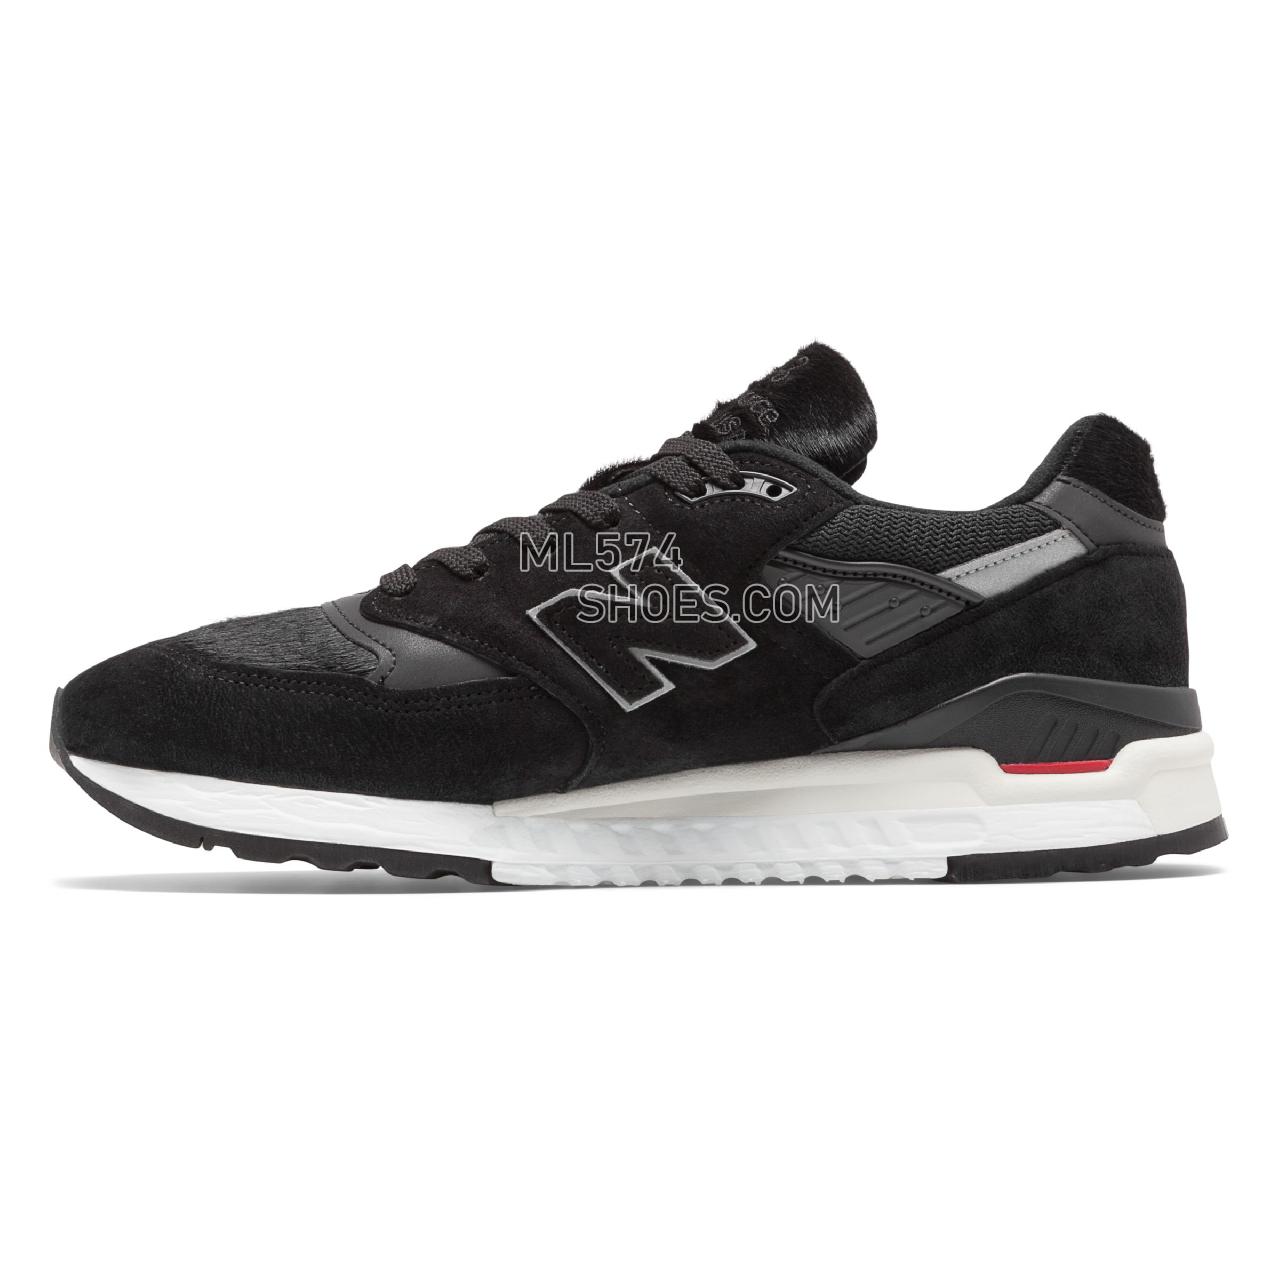 New Balance Made in US 998 - Men's 998 Made in US Classic M998-EPL - Black with Red - M998TCB